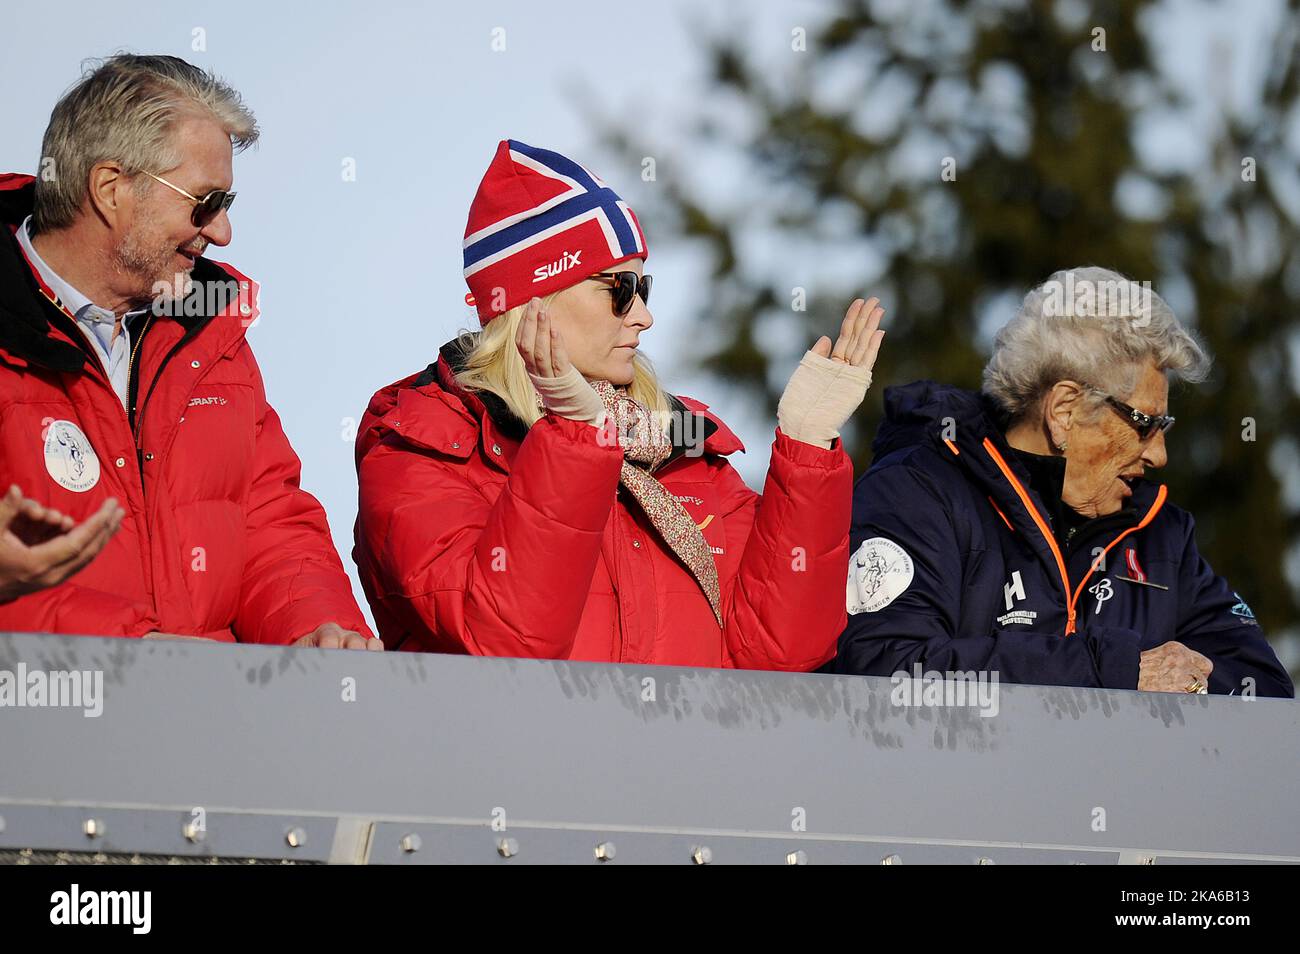 Oslo, Norway, 20150315 The Norwegian Royal Family were present in the Royal box at the Holmenkollen Ski Arena in Oslo Sunday March 15, 2015 for the last World Cup skijump competition of the season. Picture shows mayor of Oslo, Fabian Stang, Crownprincess Mette-Marit and Princess Astrid. Photo: Jon Olav Nesvold / NTB scanpix  Stock Photo